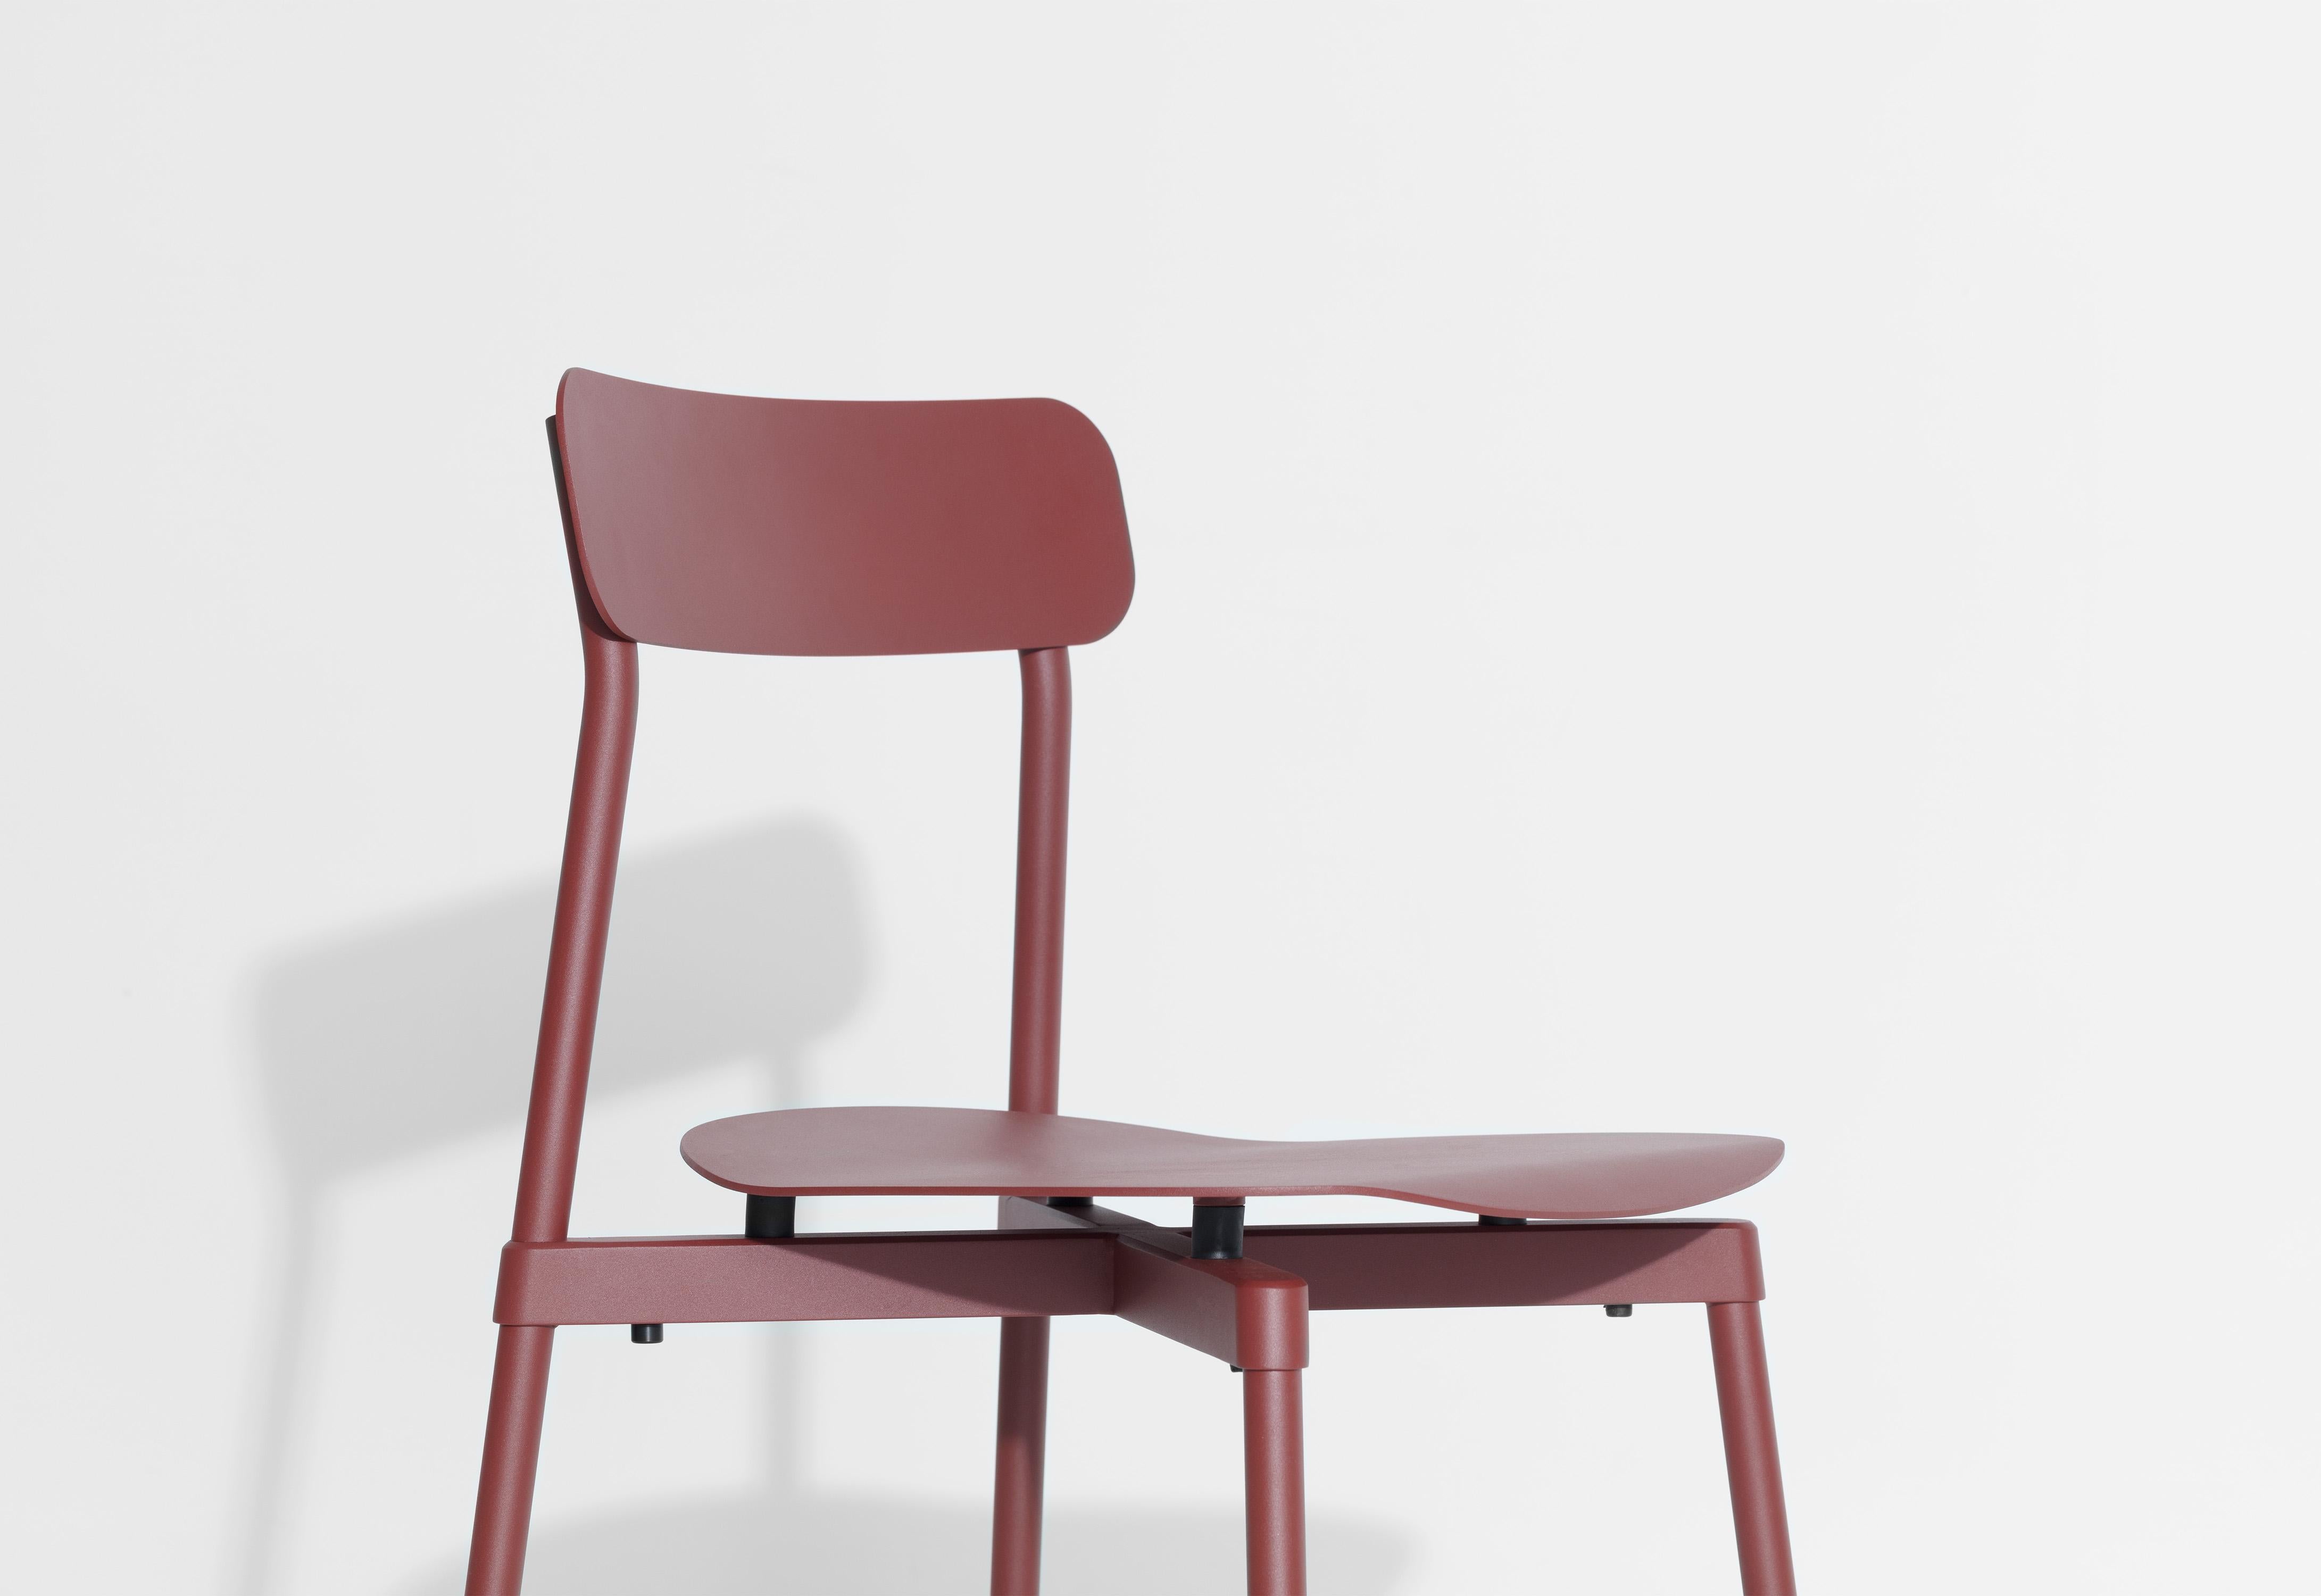 Aluminum Petite Friture Fromme Chair in Brown-Red Aluminium by Tom Chung, 2019 For Sale